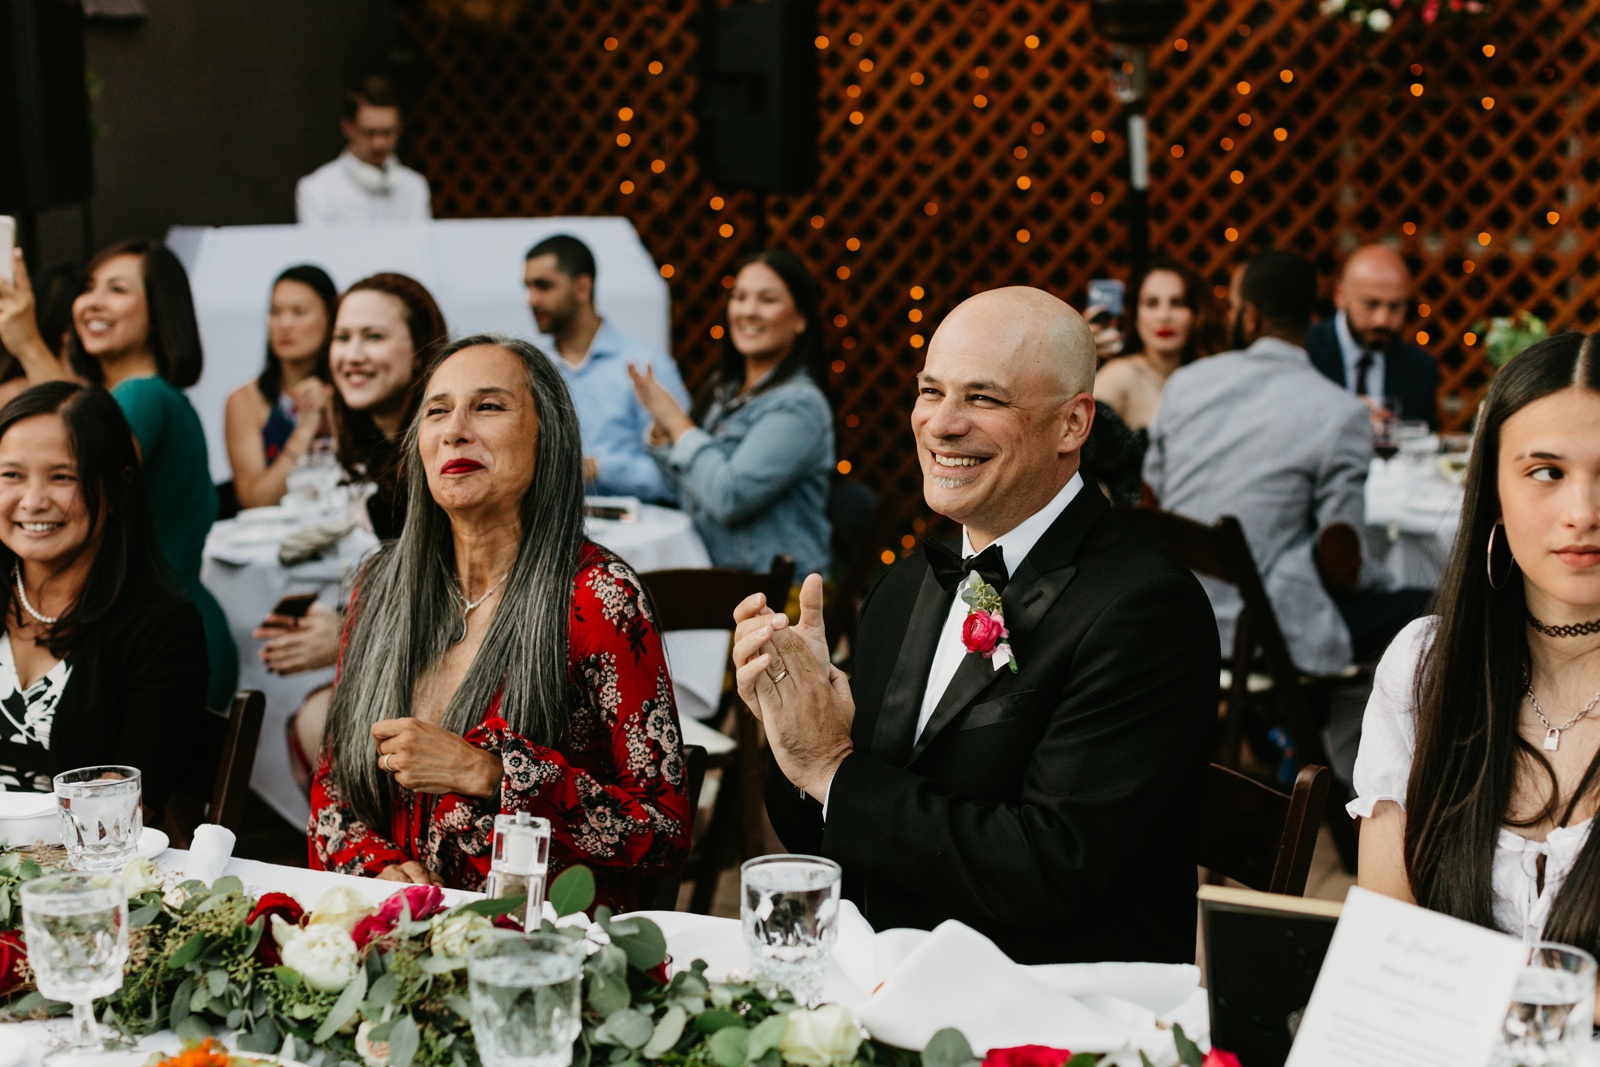 Wedding guests clapping during reception